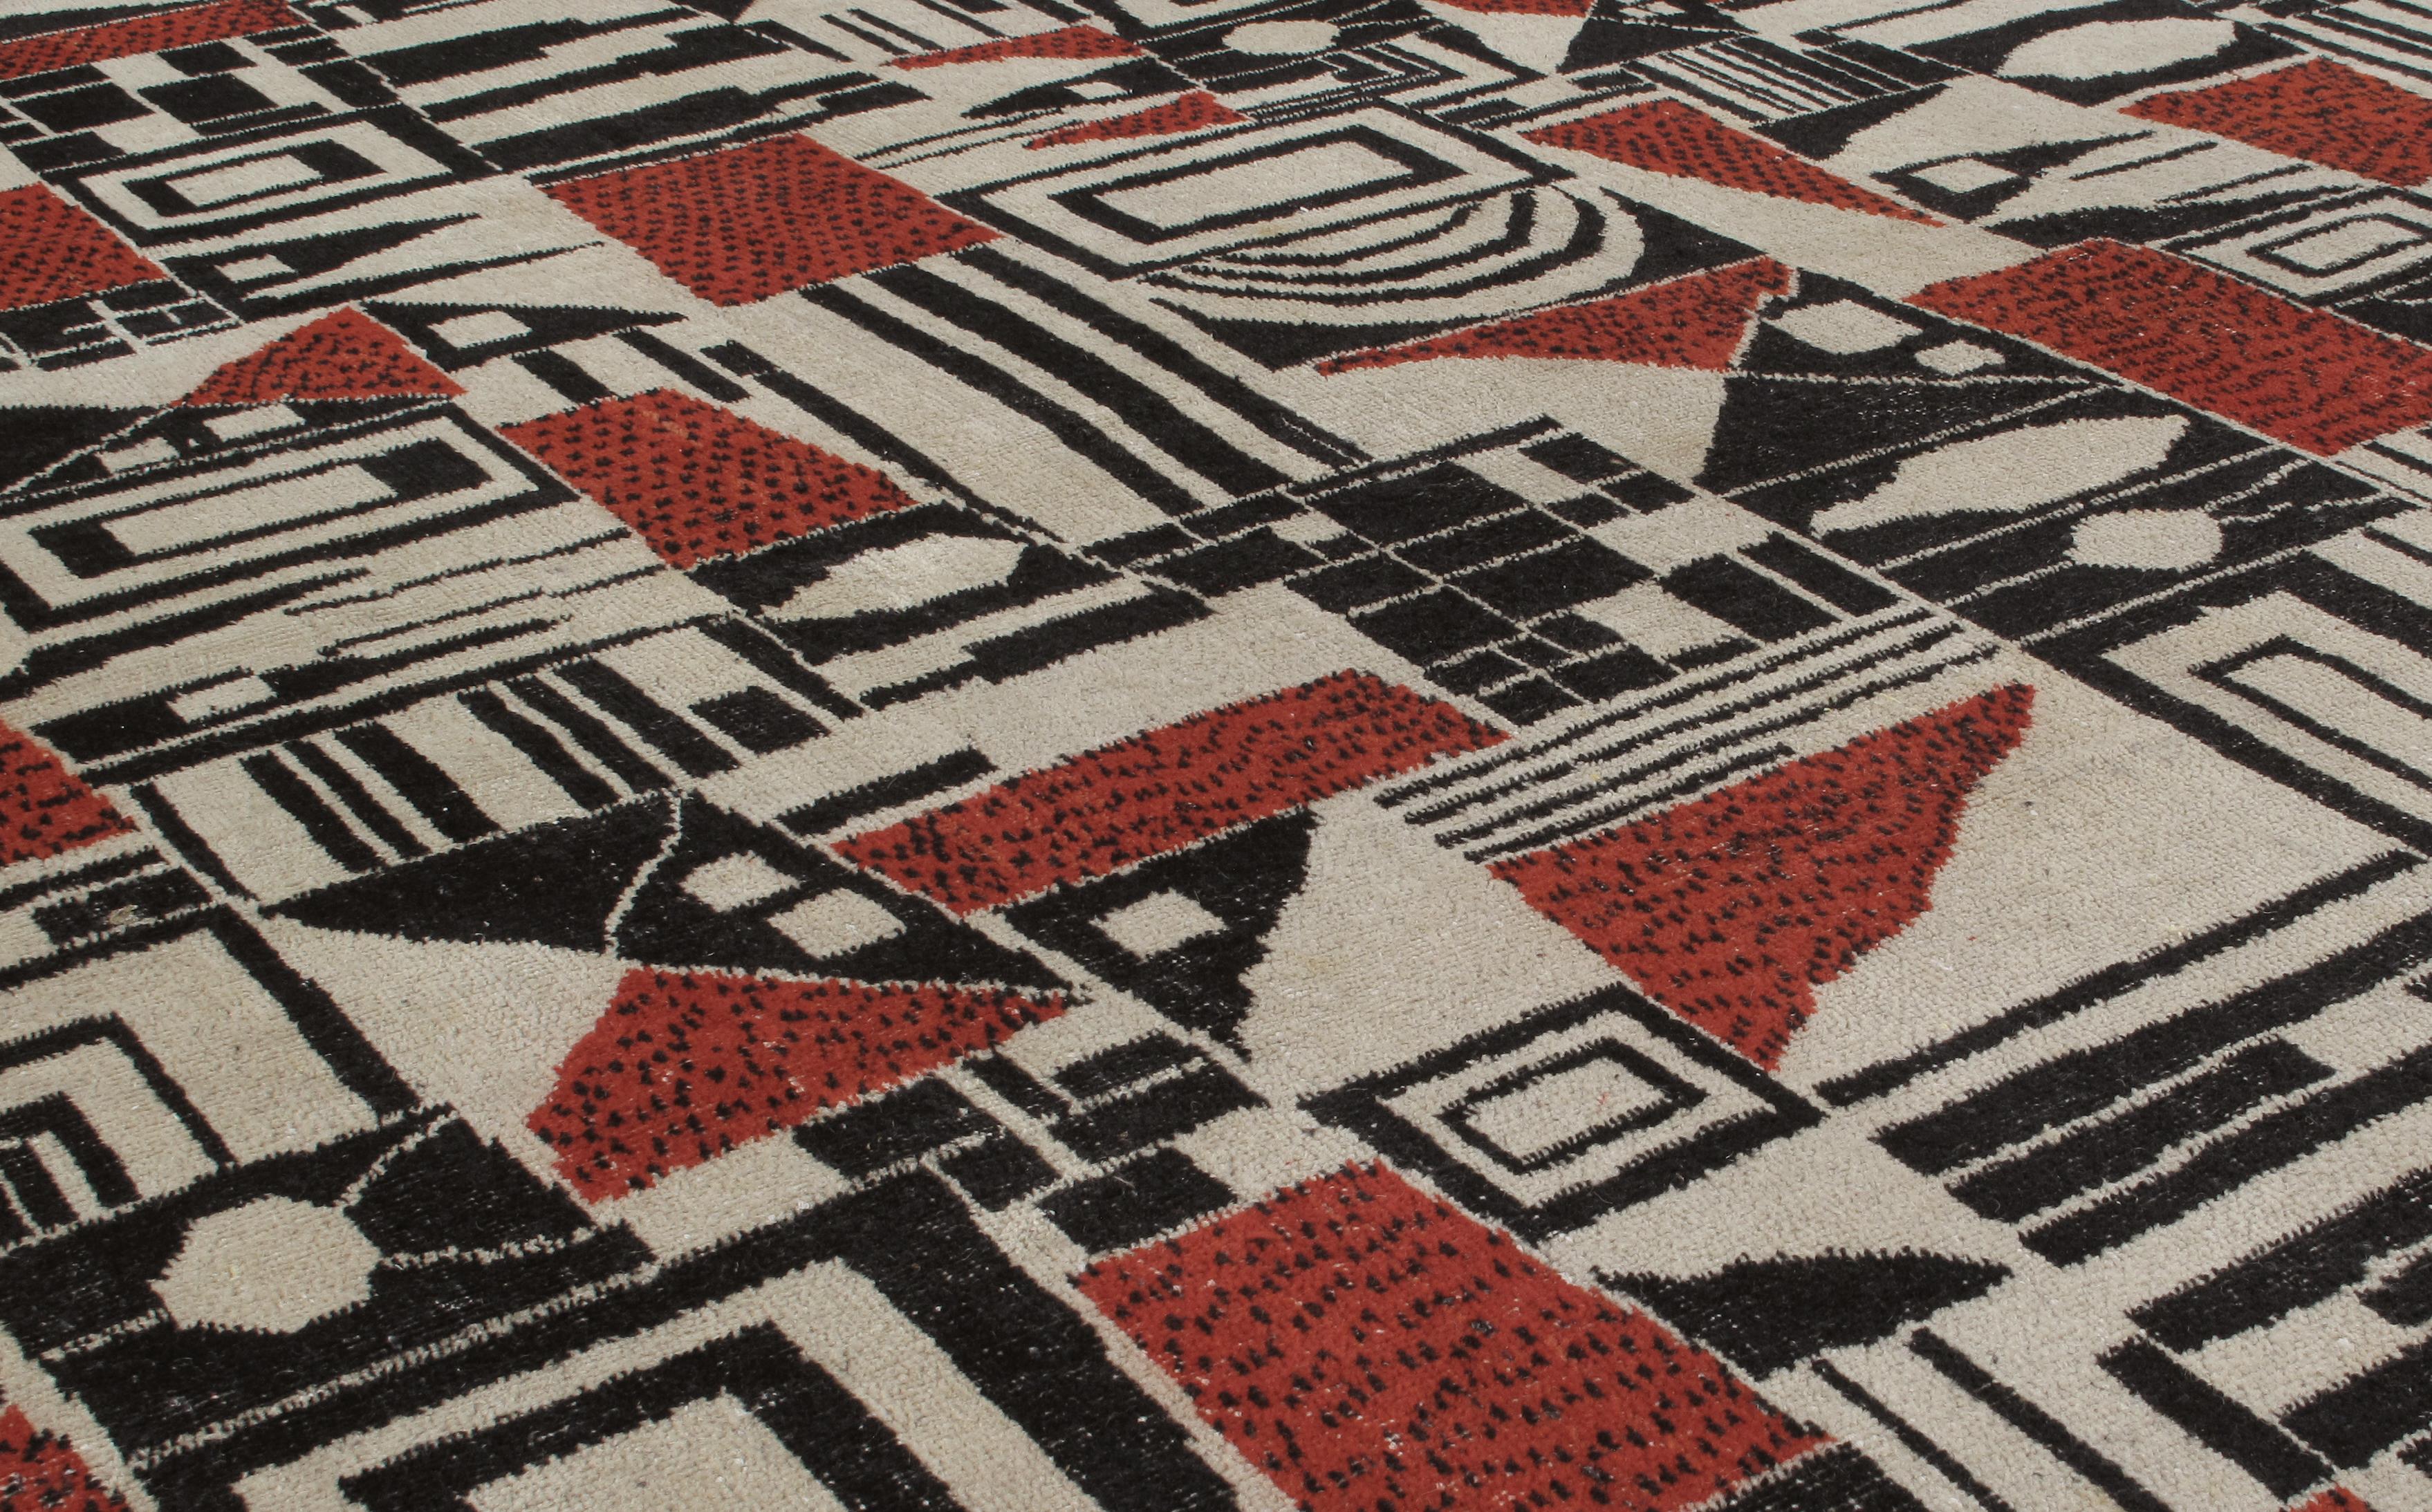 This vintage cubist rug was handmade in Turkey circa mid-20th century. It is in the style of Zeki Muren, a multidisciplinary Turkish artist, known for his bold, geometric, and whimsical designs. The harmonious pairing of color and pattern evokes a